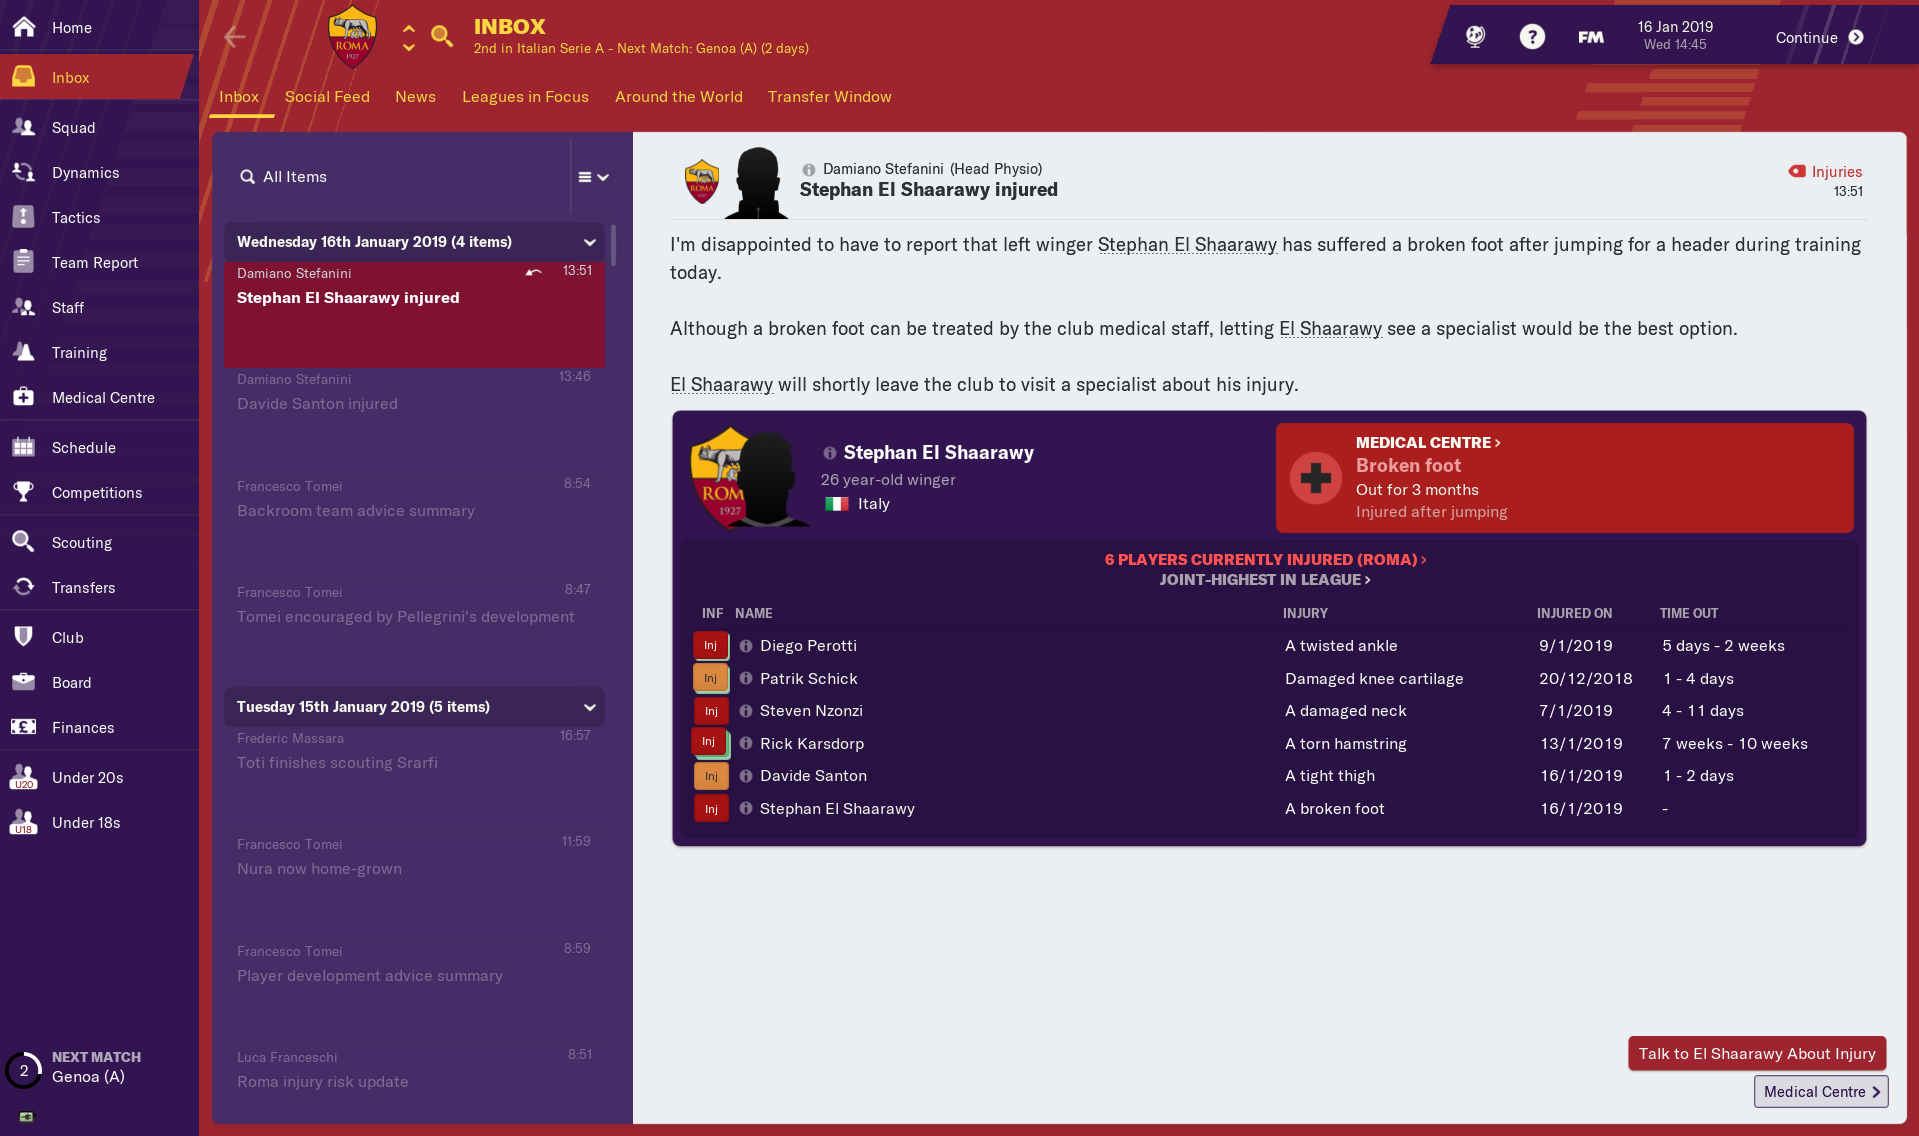 An injury news item on Football Manager 2019